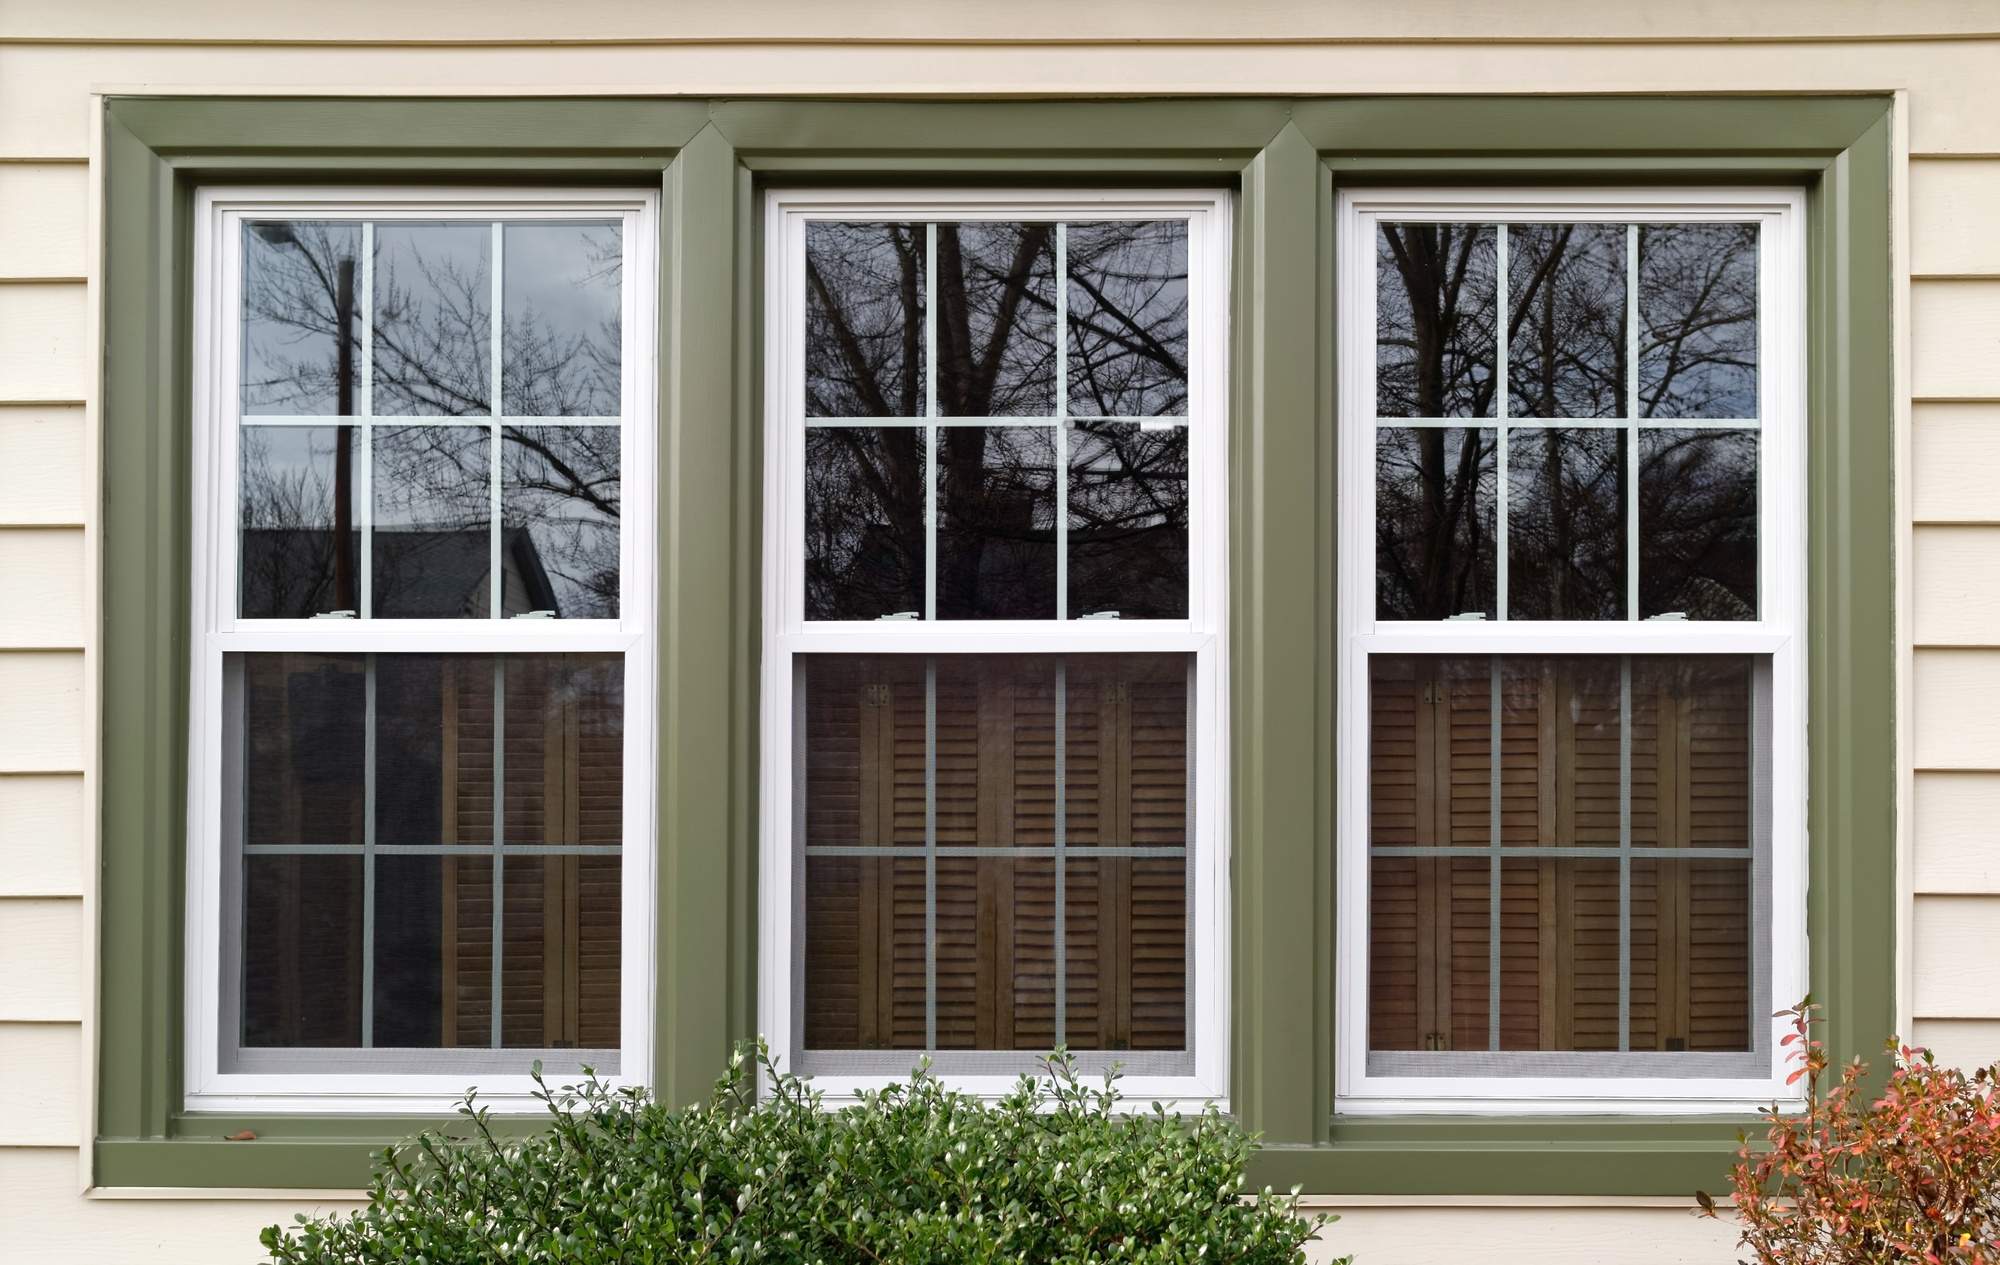 How to Tint Windows at Home